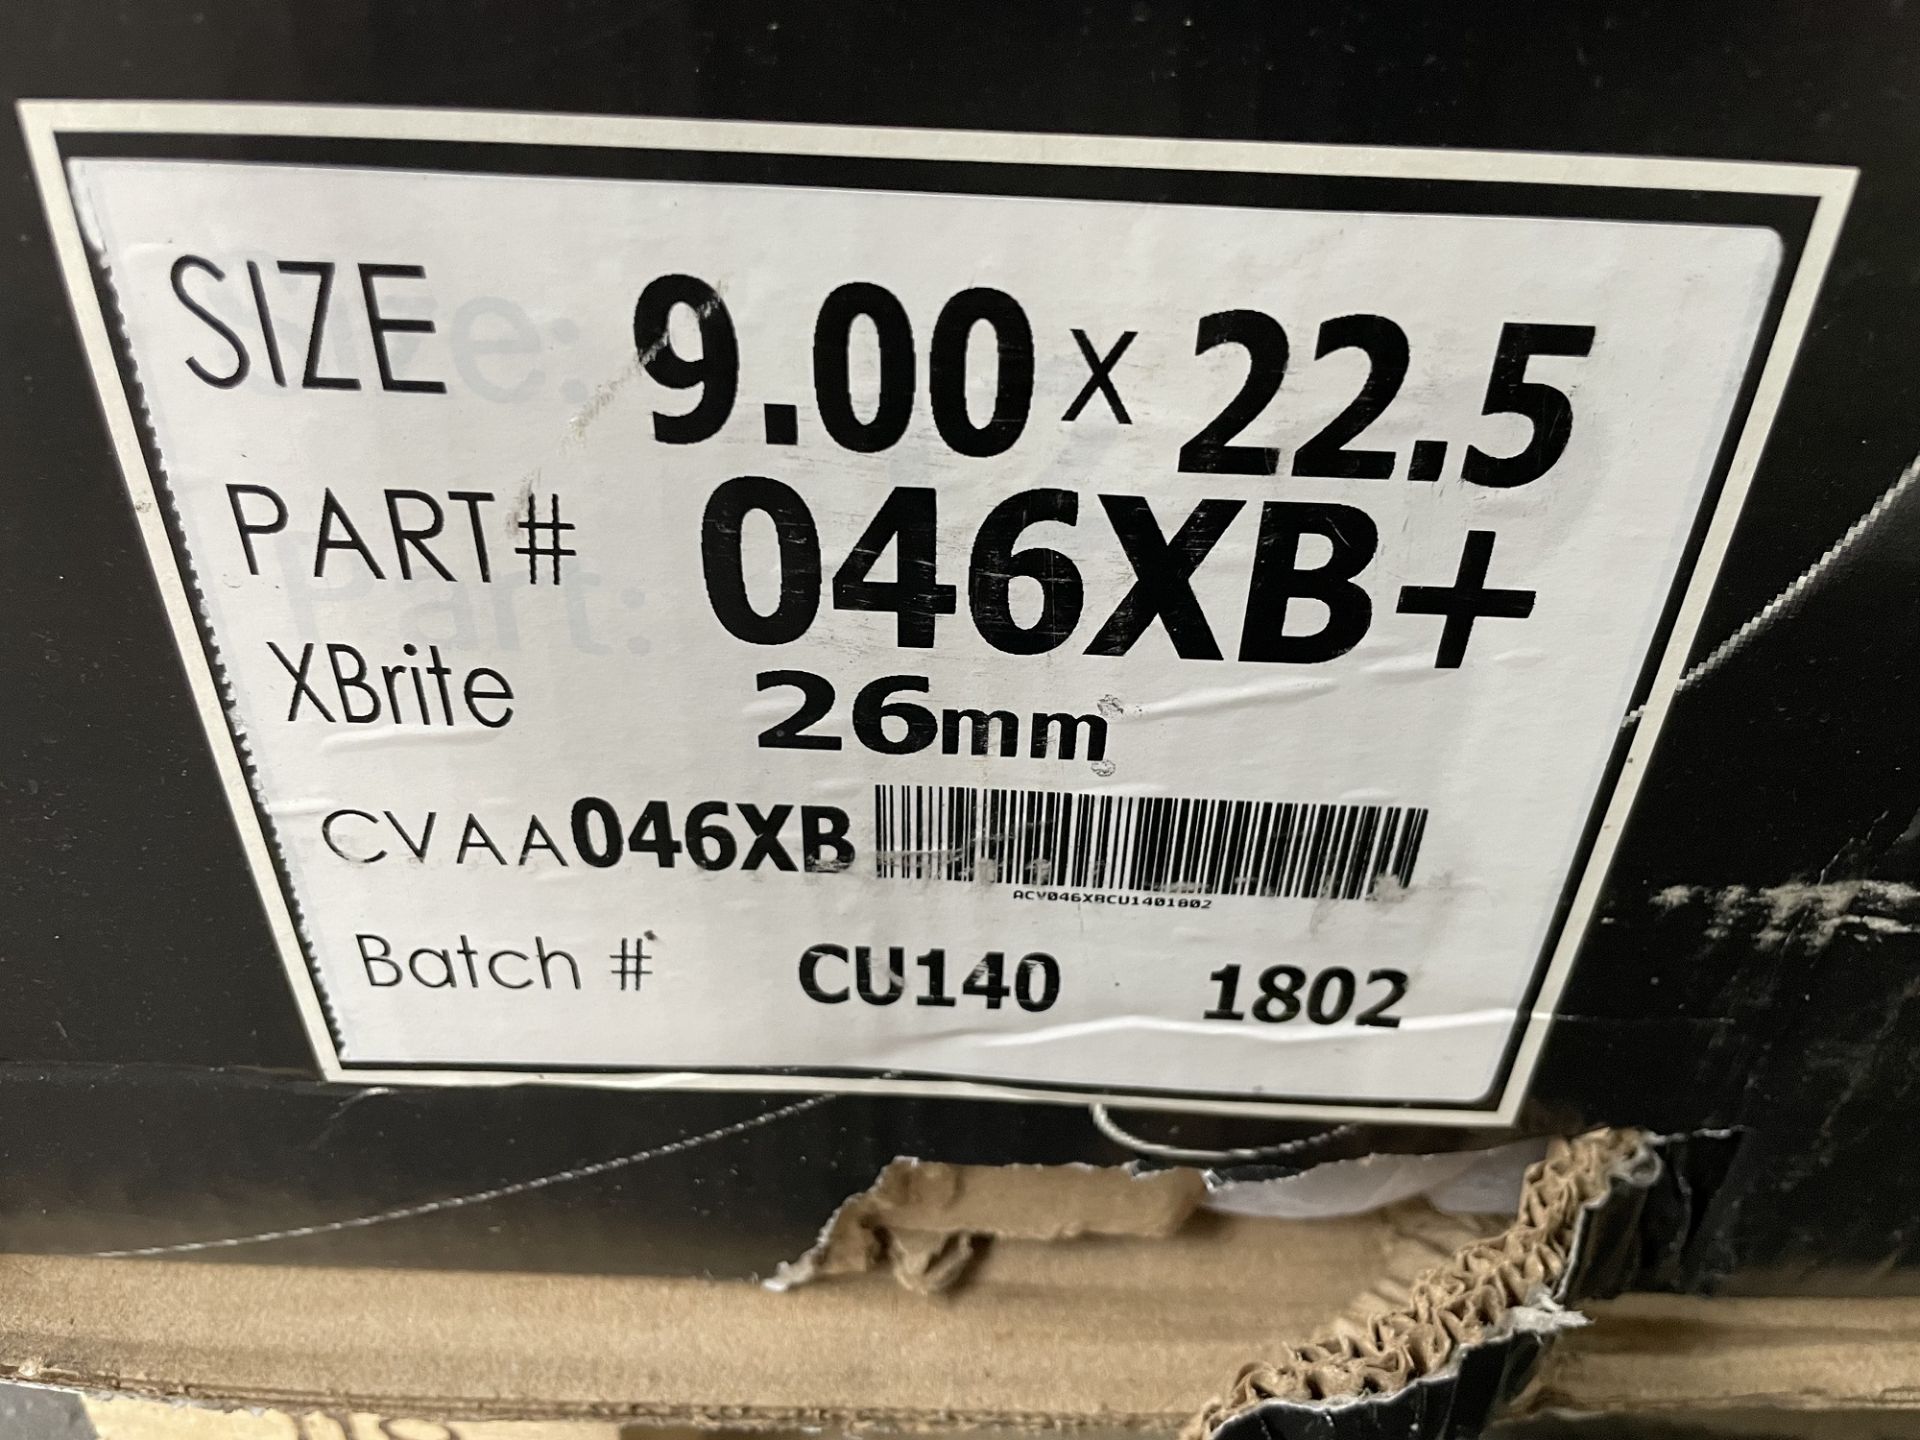 6 Xbrite Forged Aluminium Wheels, 9.00 x 22.5, Part No.046XB+, Xbrite 26mm (boxed as new). - Image 3 of 3